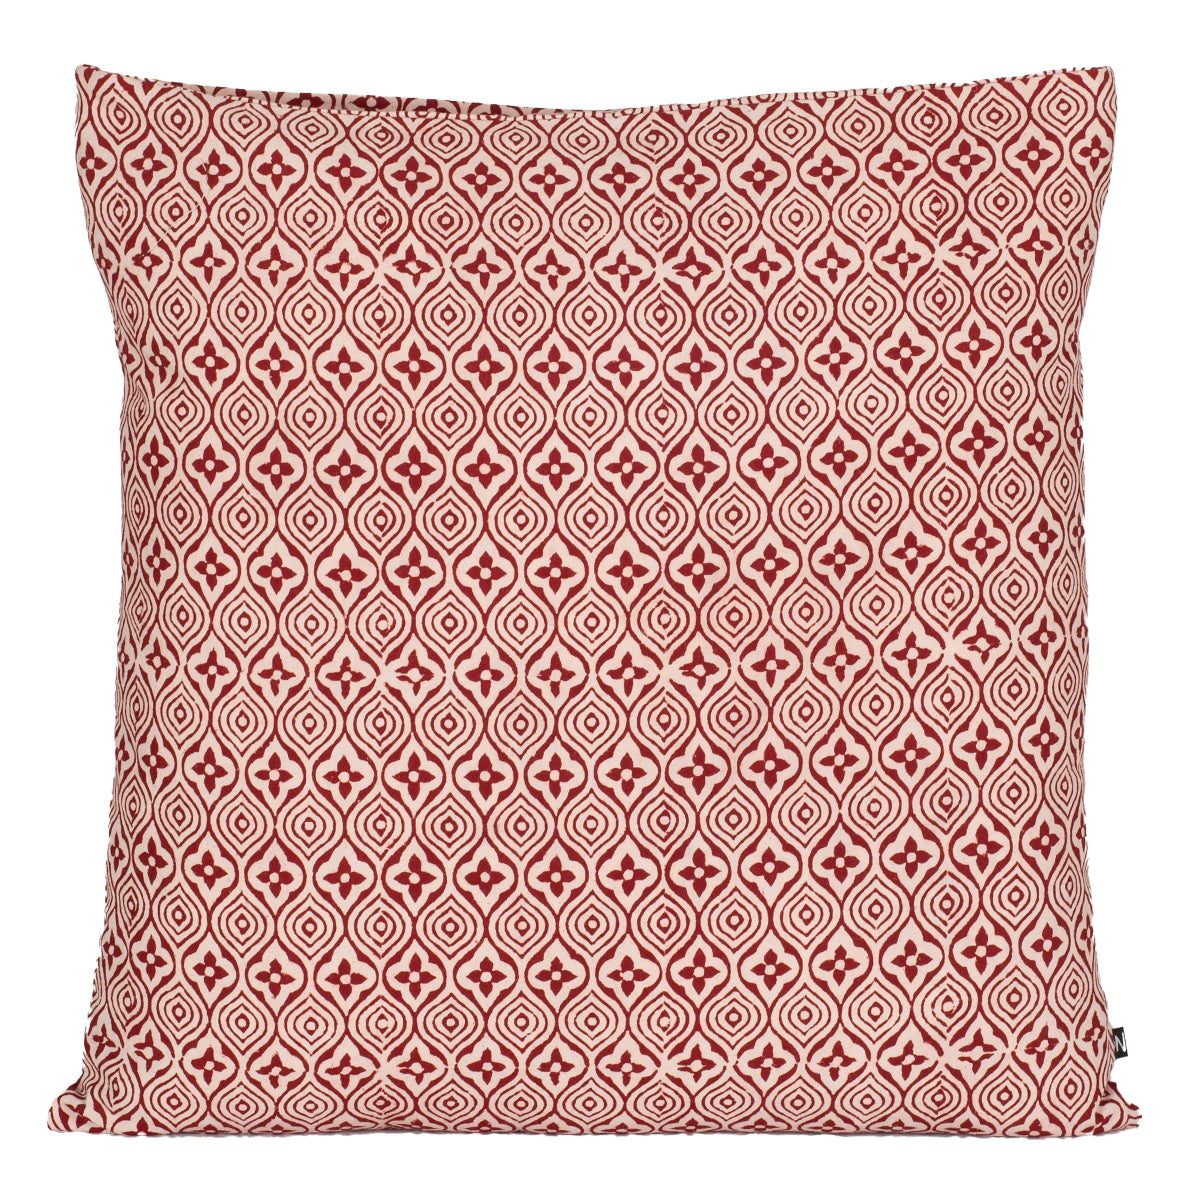 Flower Tile Bagh Hand Block Print Cotton Cushion Cover - Red White-0